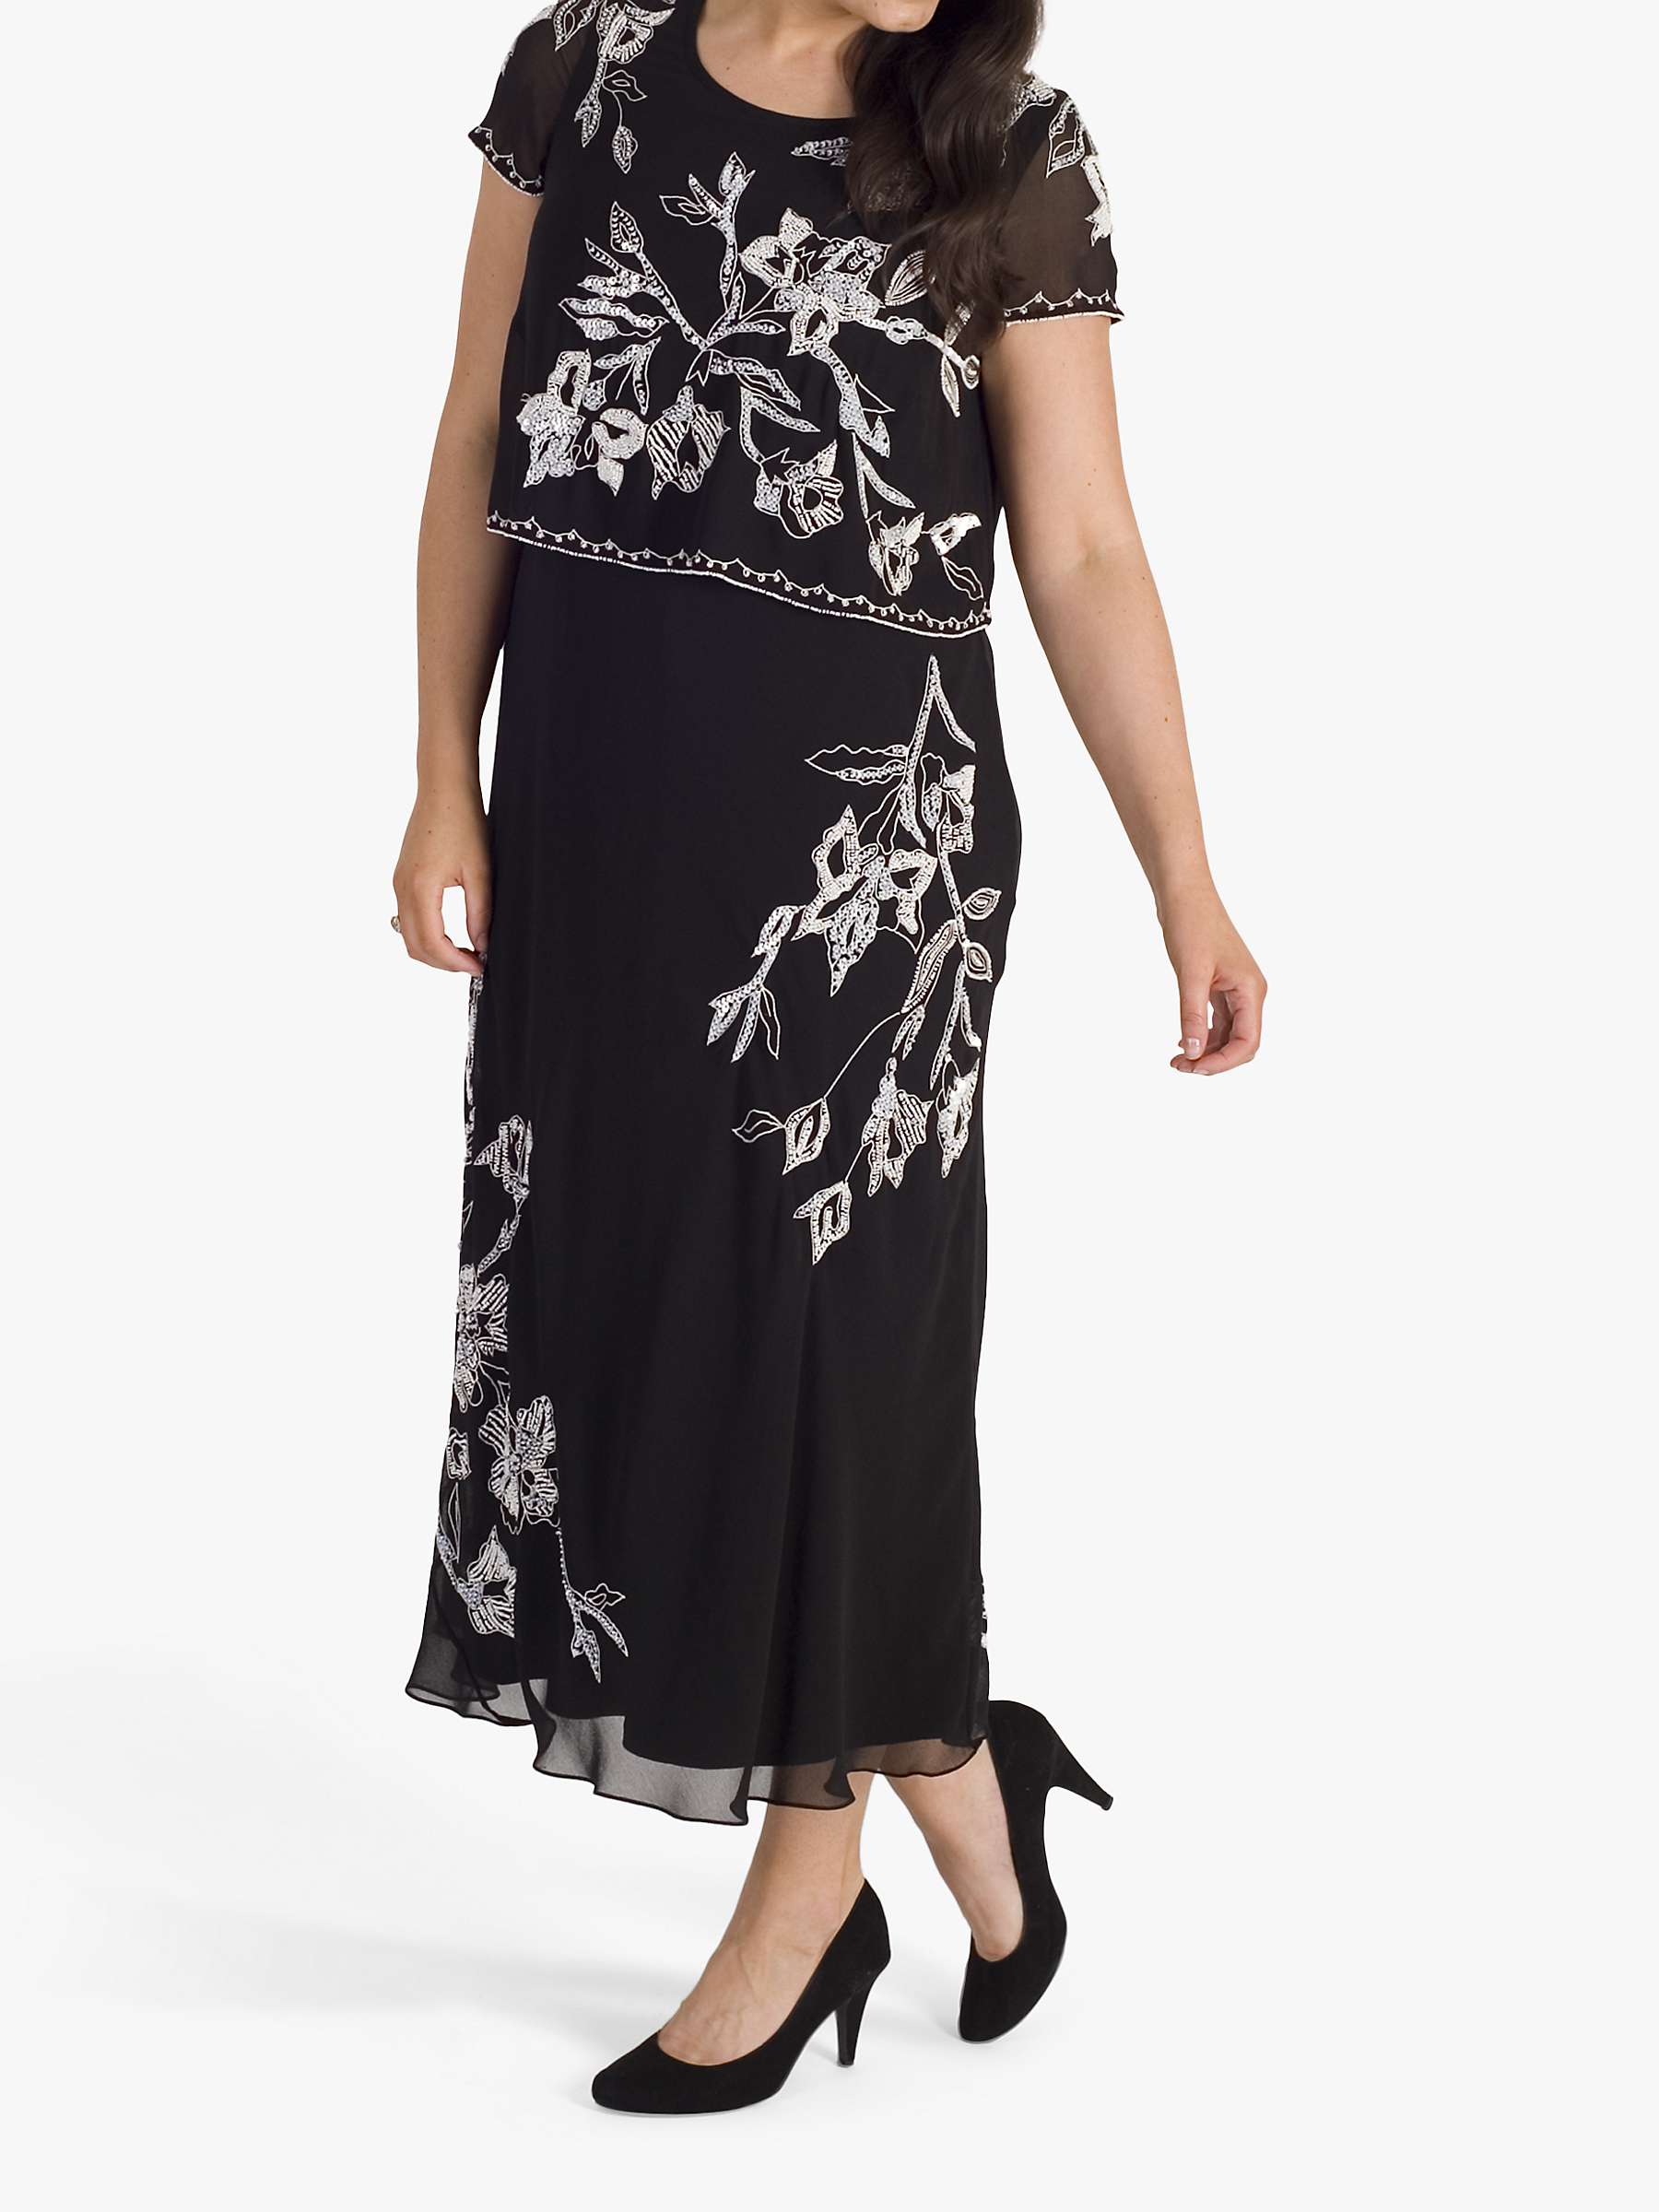 Buy chesca Lily Bead Embroidered Double Layered Chiffon Dress, Black/Ivory Online at johnlewis.com